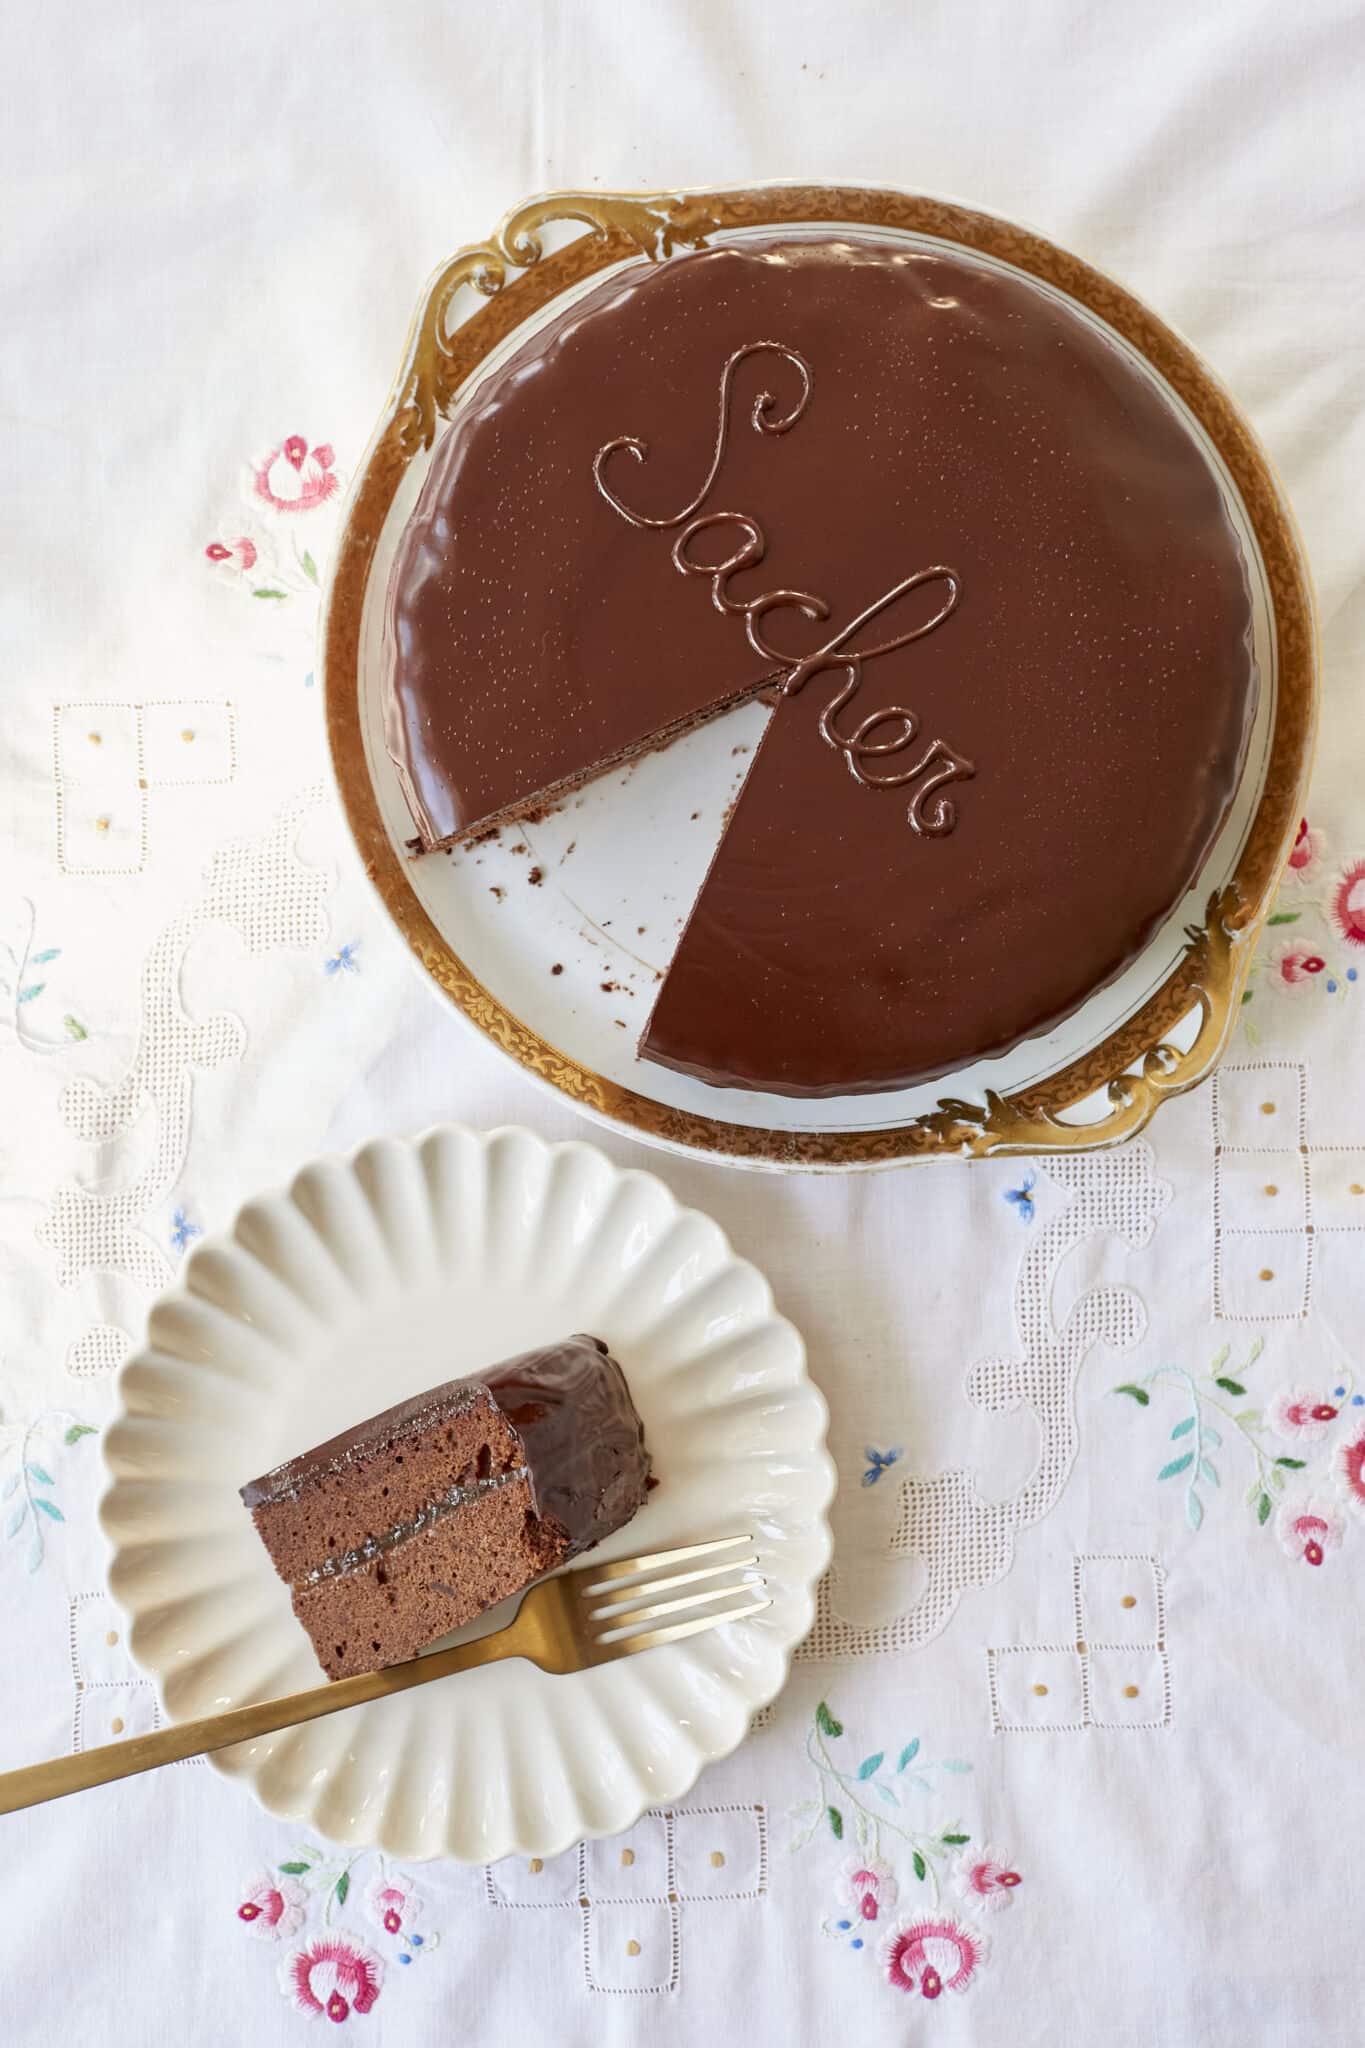 Classic Austrian Sacher Torte is placed on a round golden rim platter. A slice is cut and served on a white dessert plate. It shows the moist, fine crumb of the chocolate sponge cake and the silky smooth, shinny glaze. 